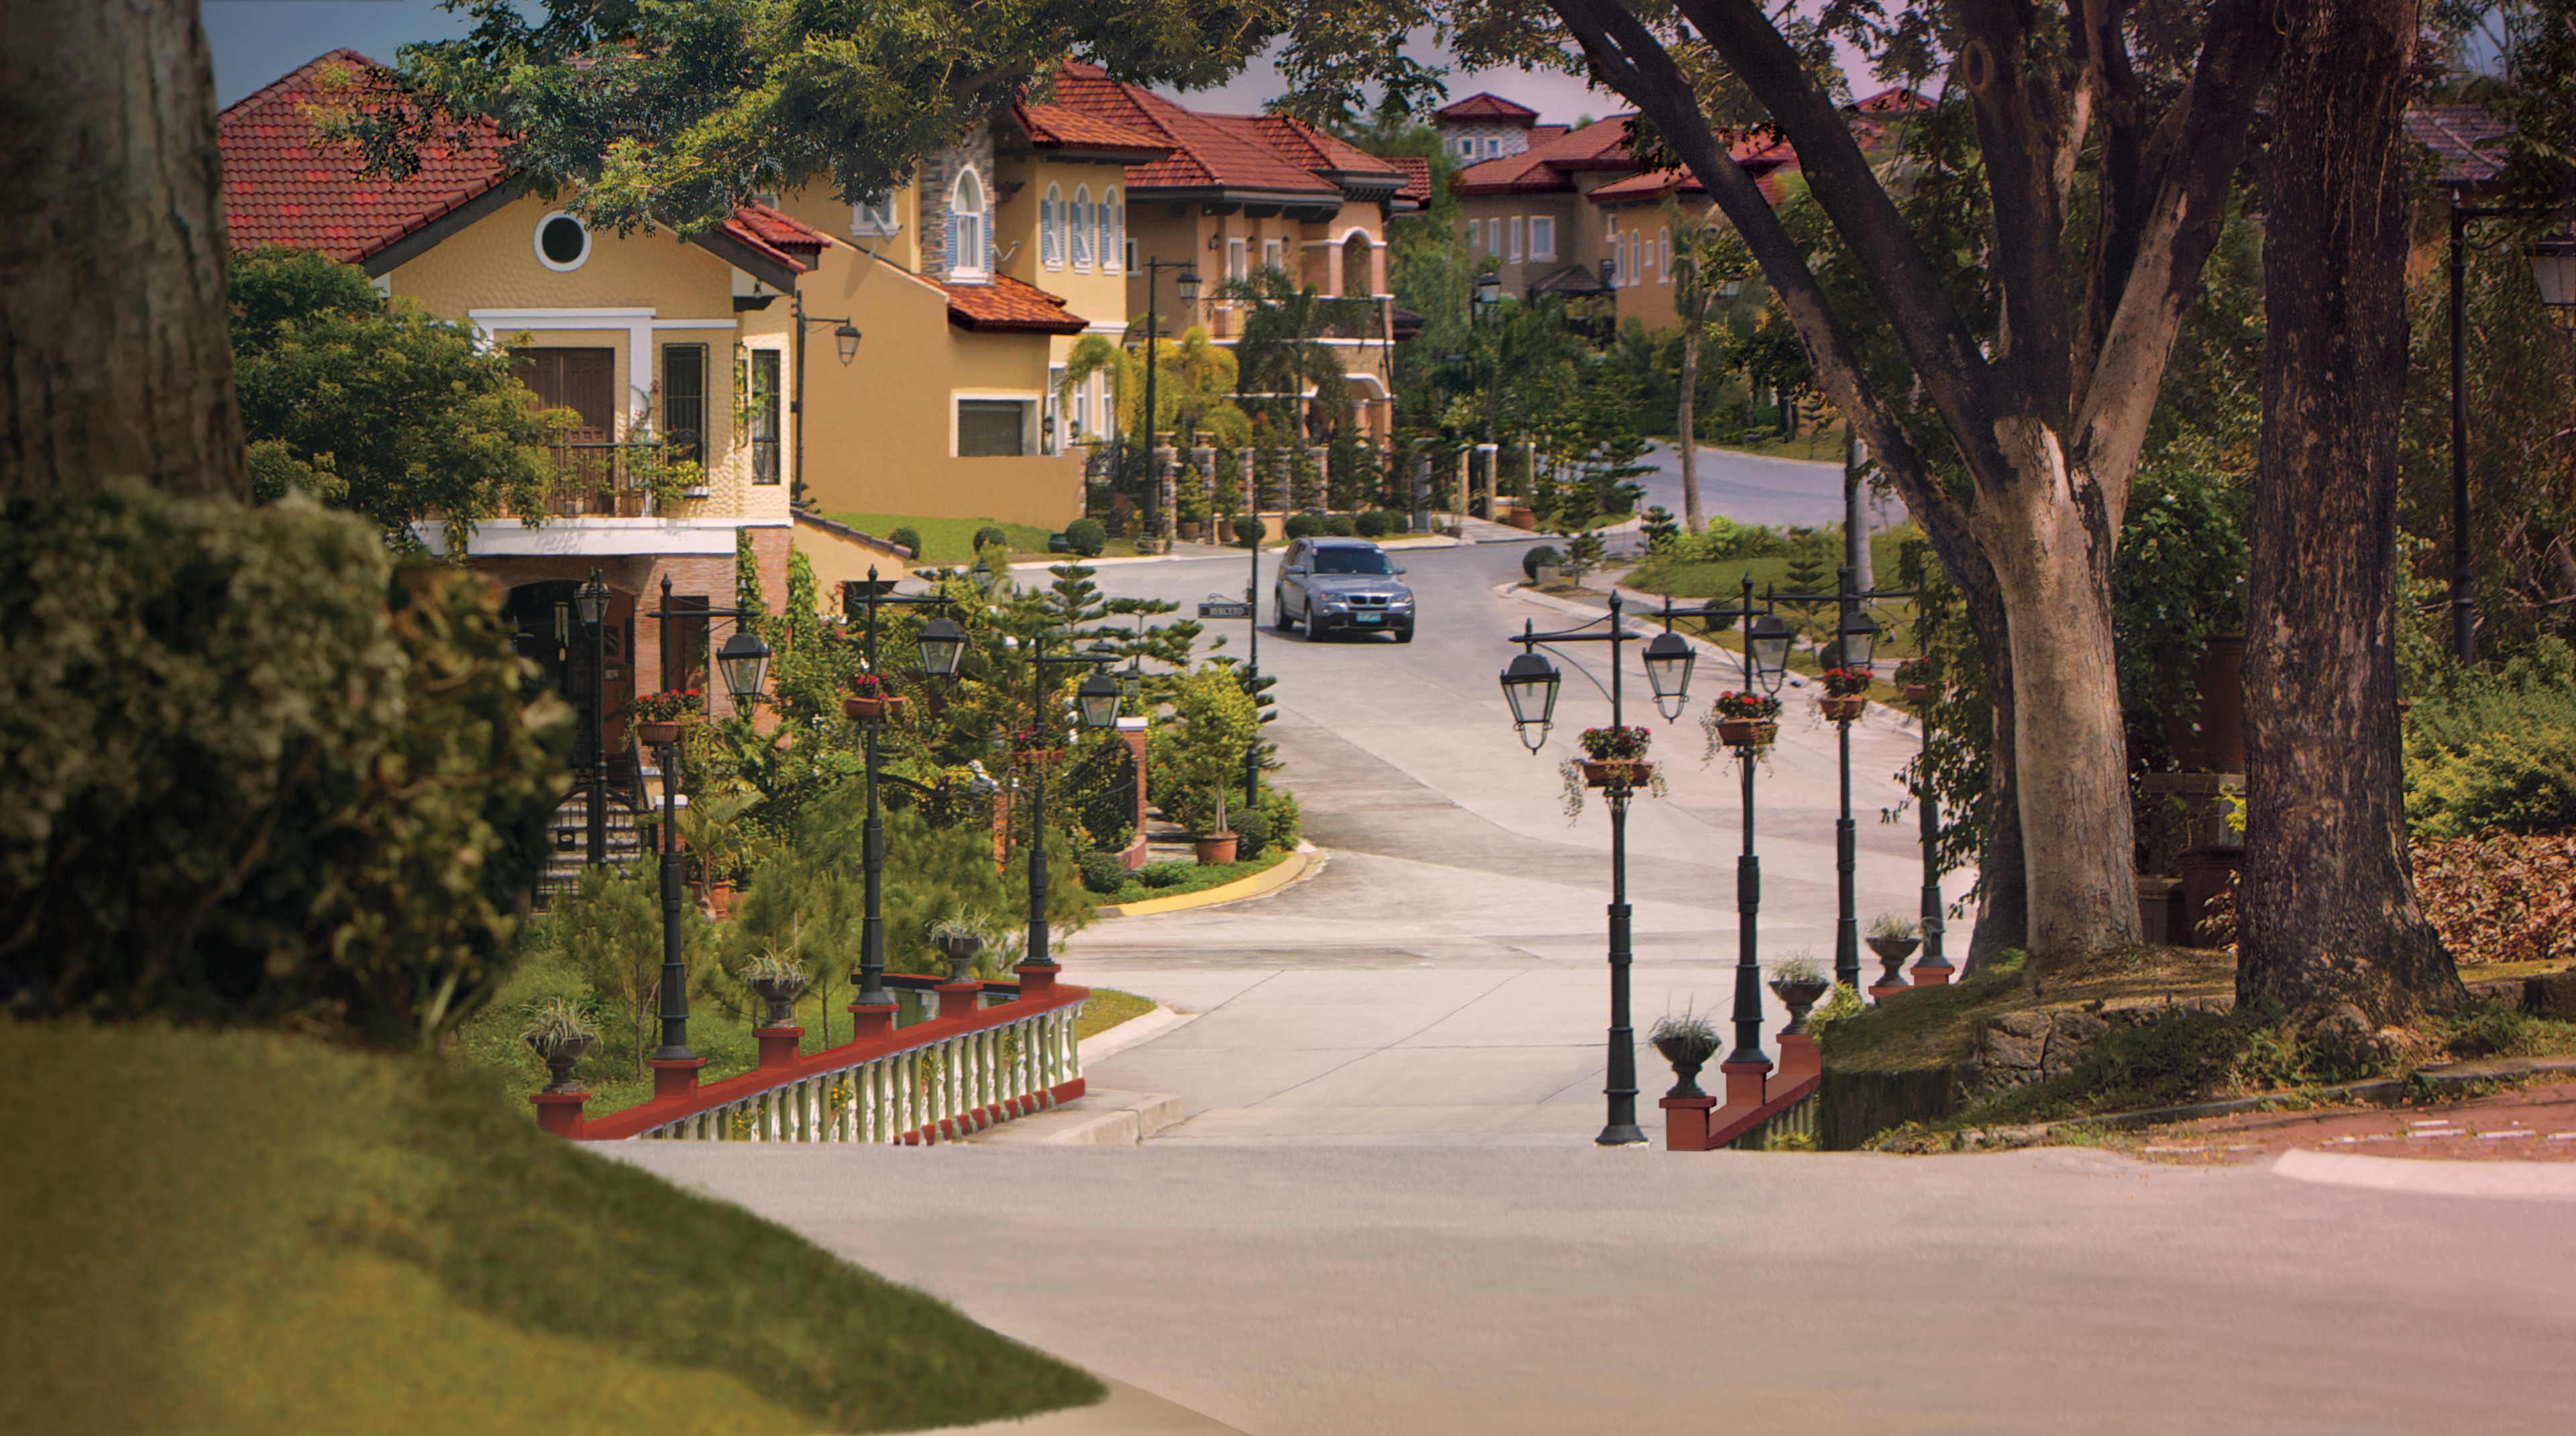 Both Portofino Heights and South are situated in Alabang.